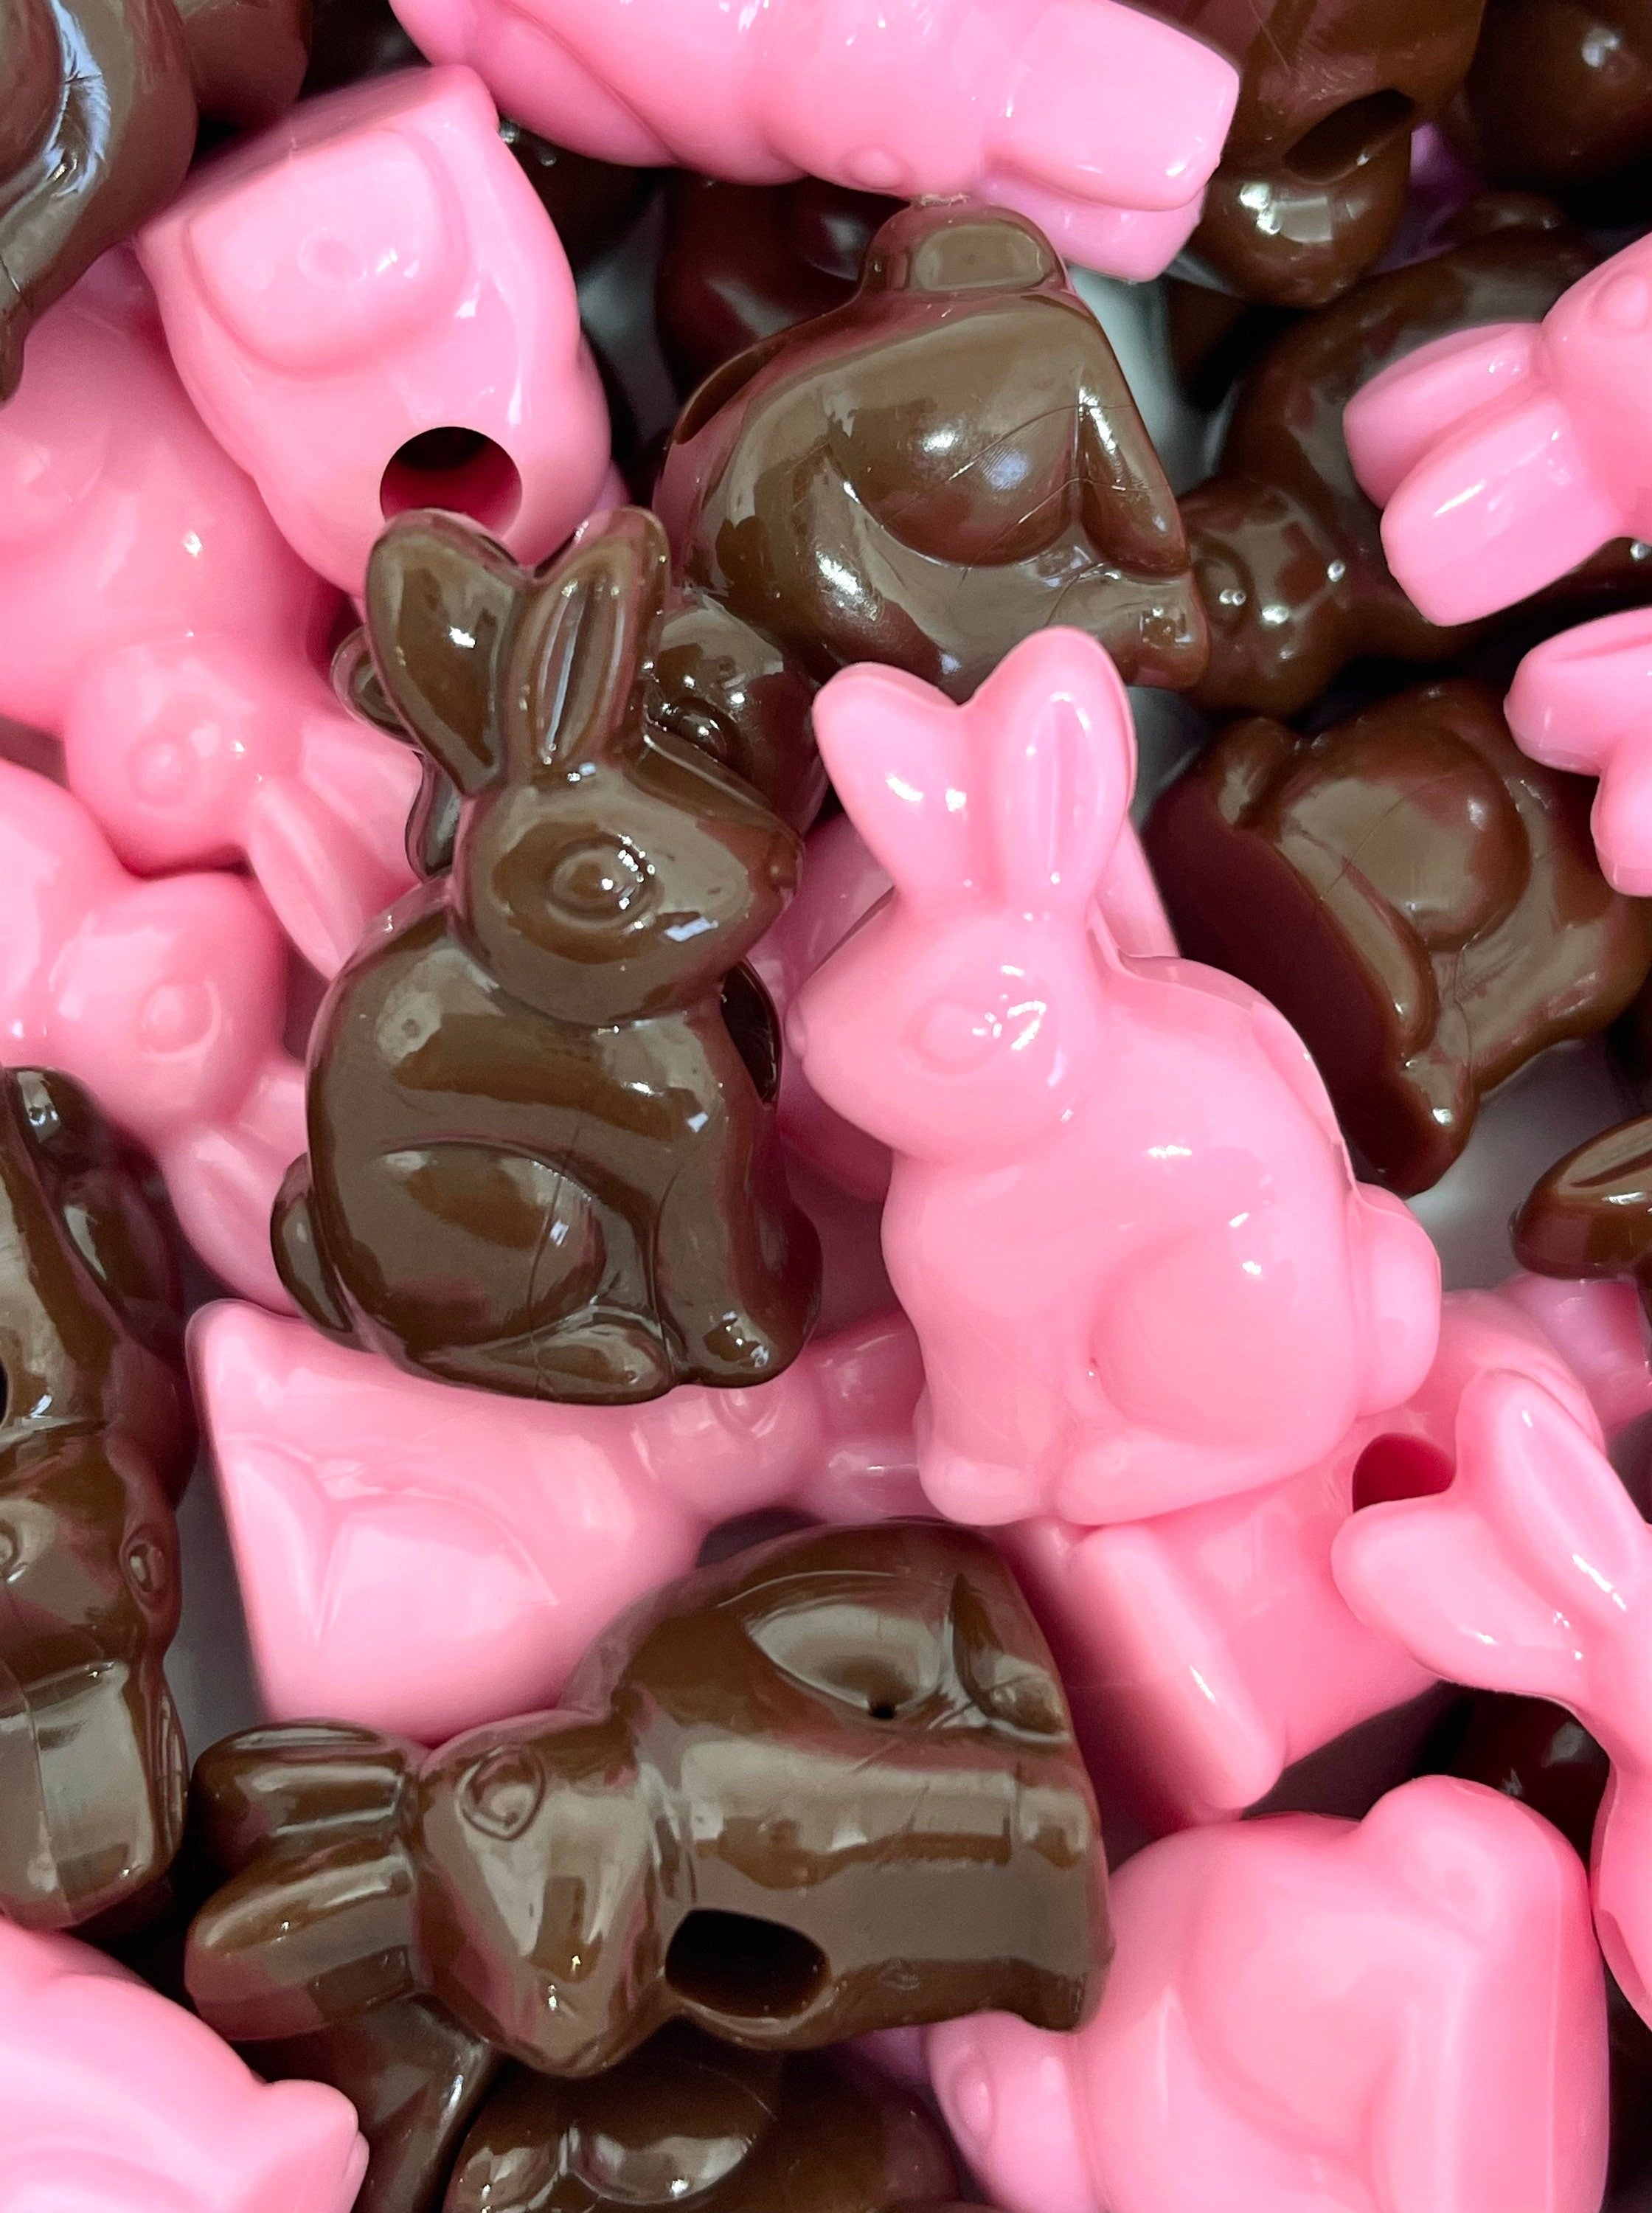 Chocolate Bunny Beads, Animal Beads for Easter, Easter Beads, Pink and Brown Beads for Jewelry Making, Pet Beads, Large Hole Beads